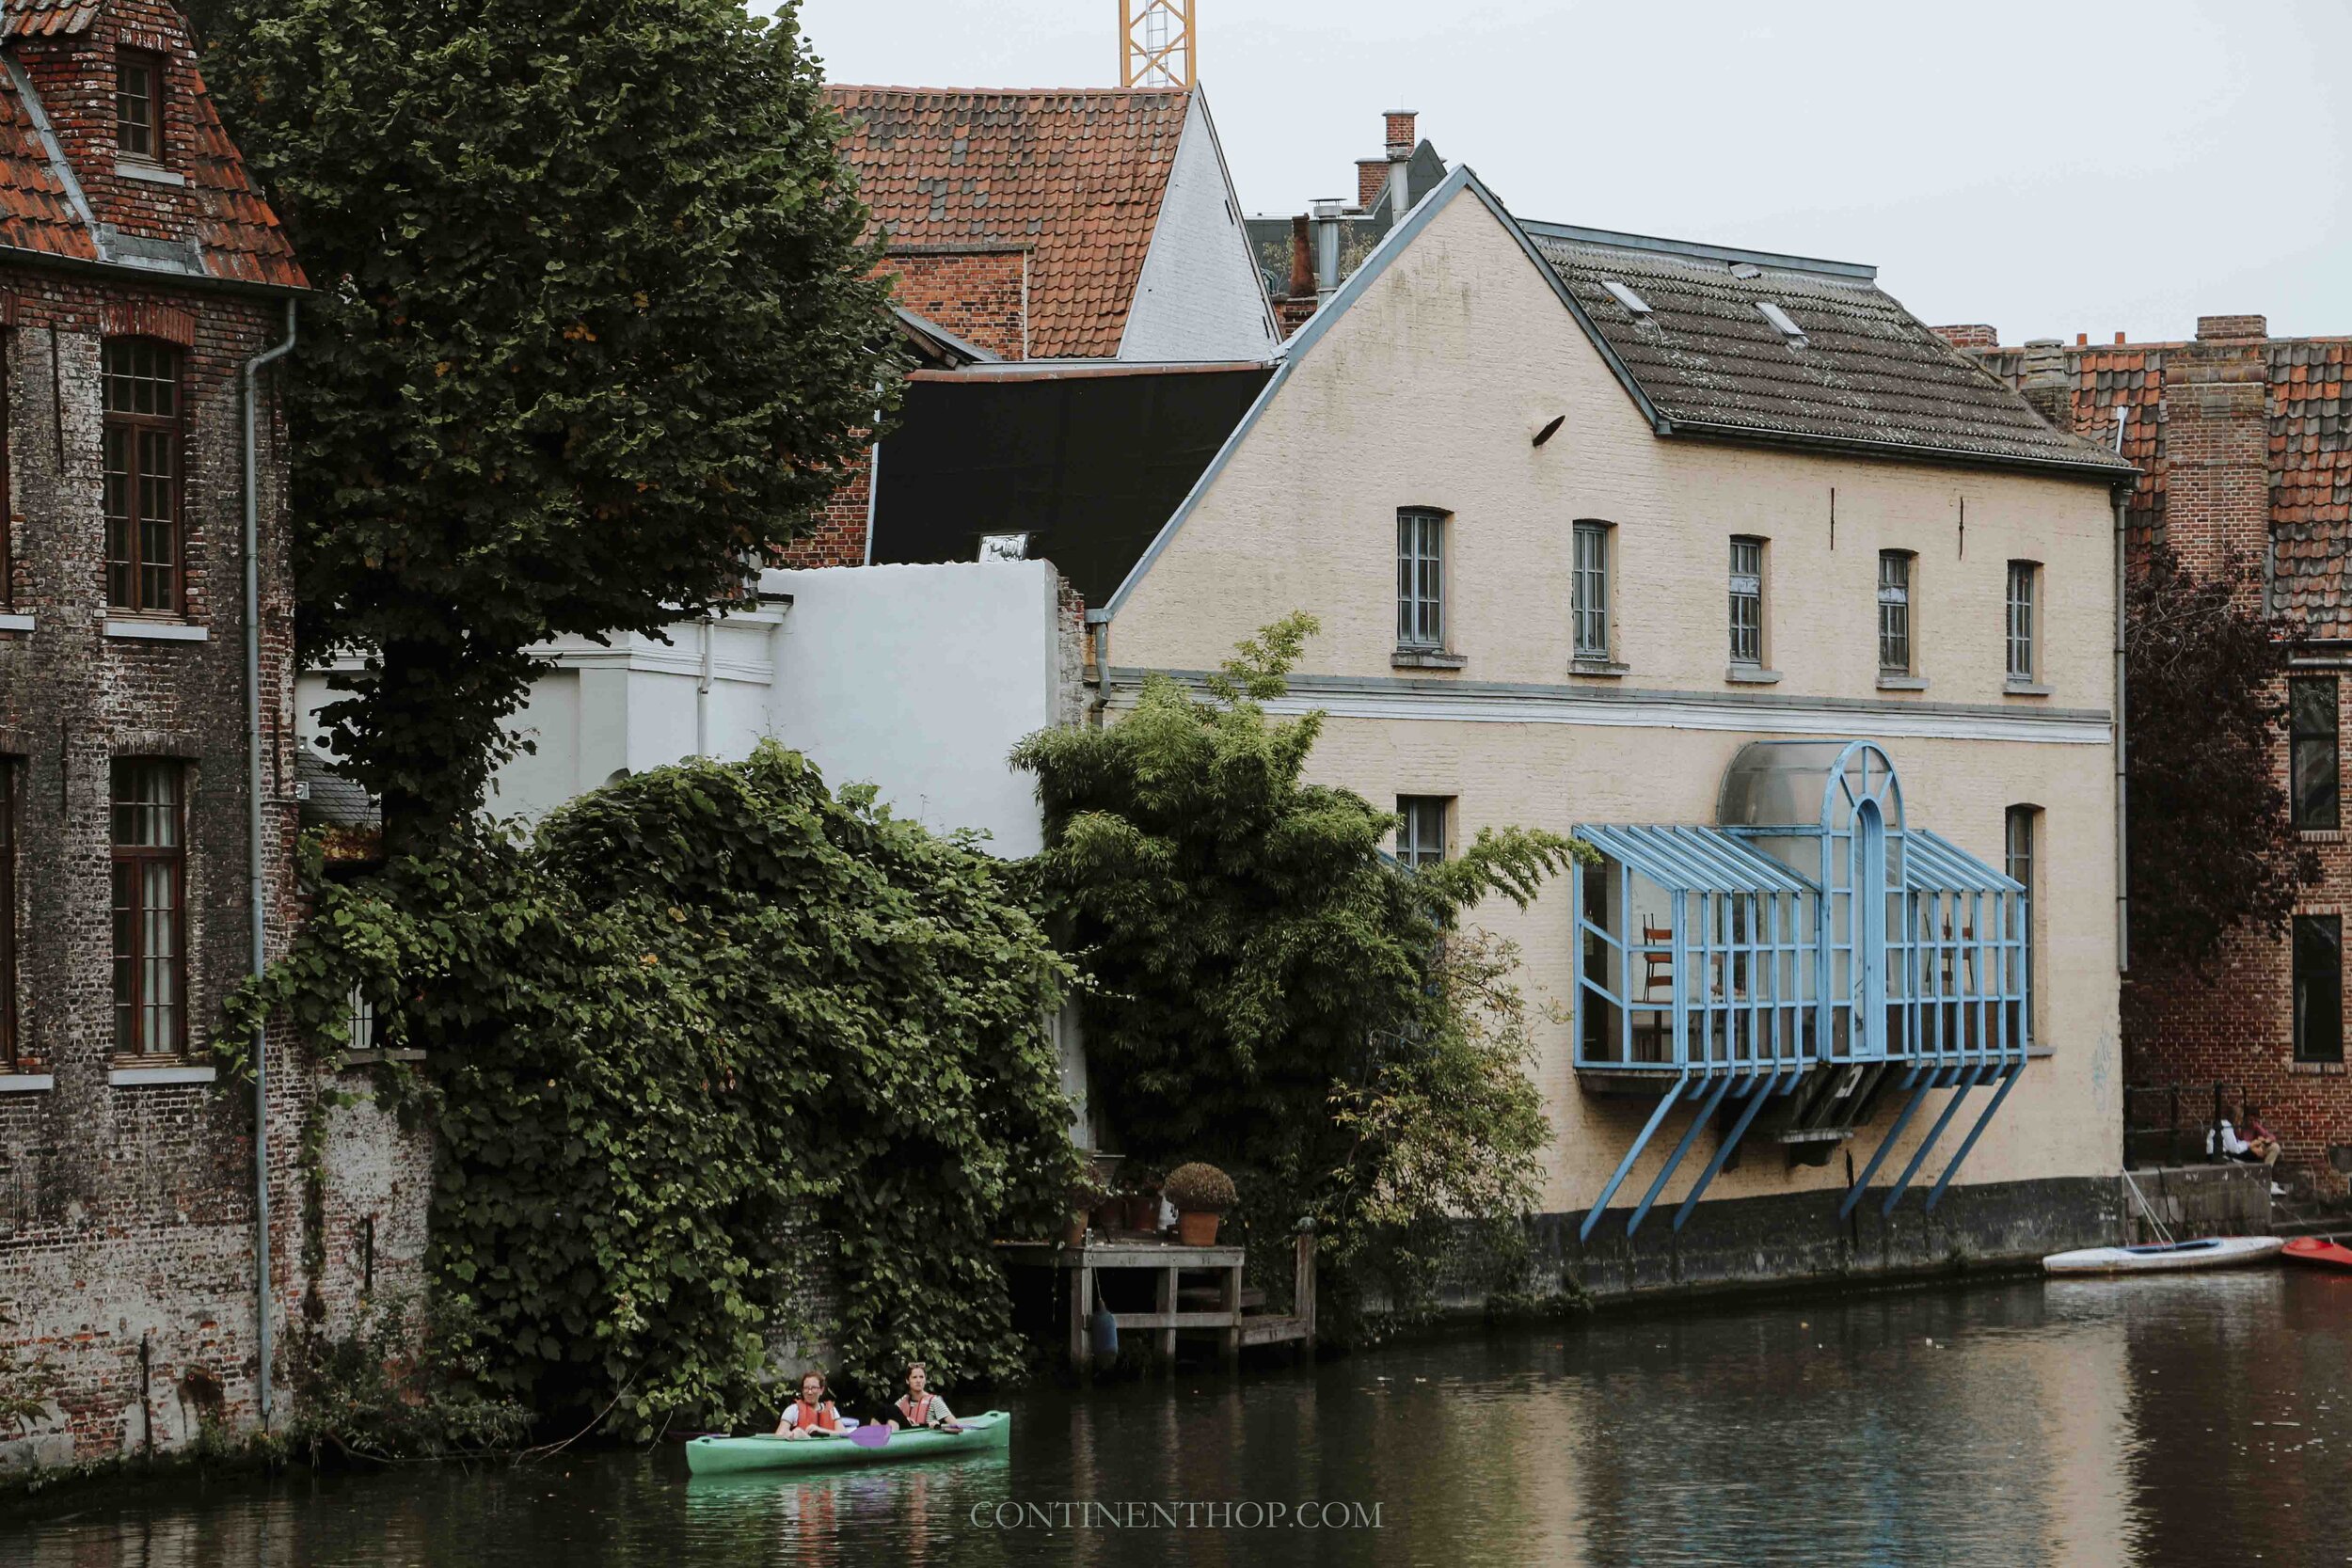 People canoeing in the river Leie in Ghent passing through colorful houses